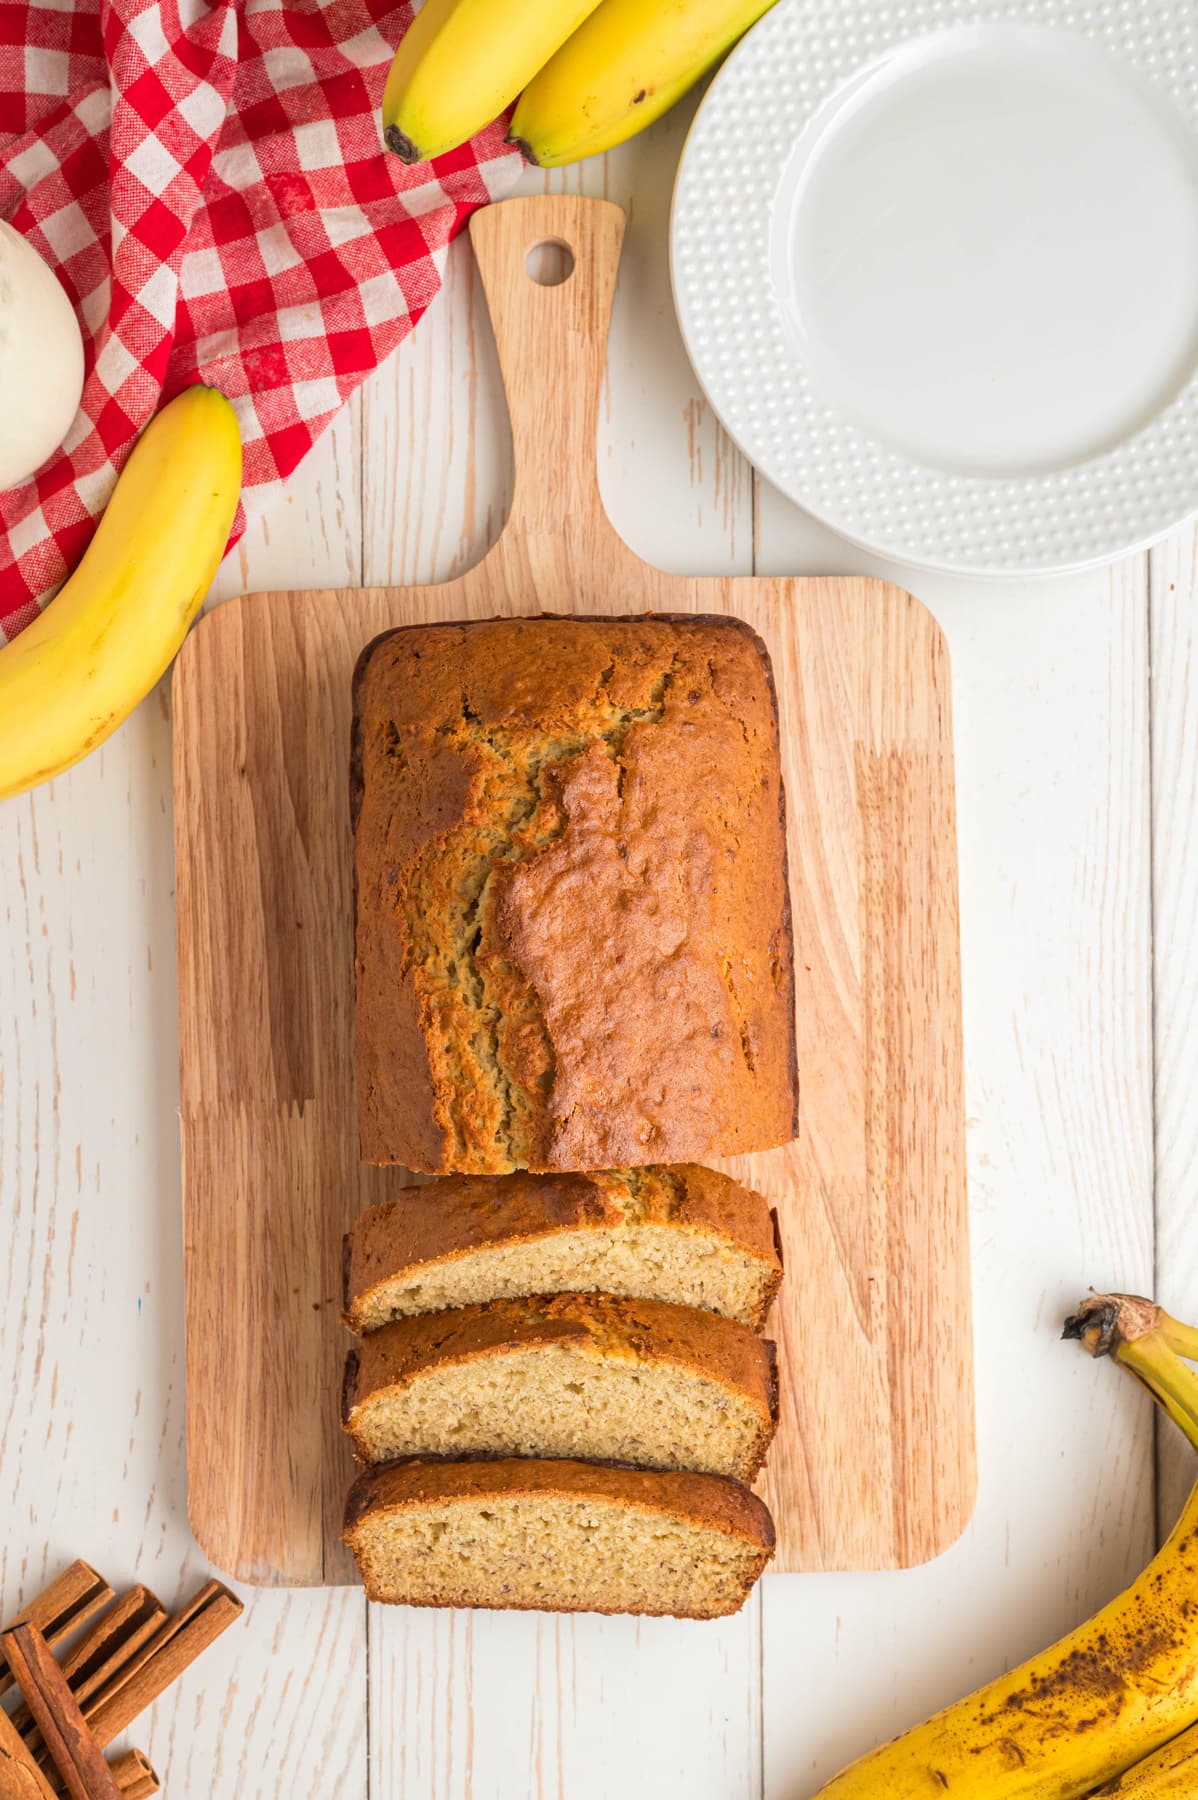 Overhead view of a loaf of banana bread on a cutting board